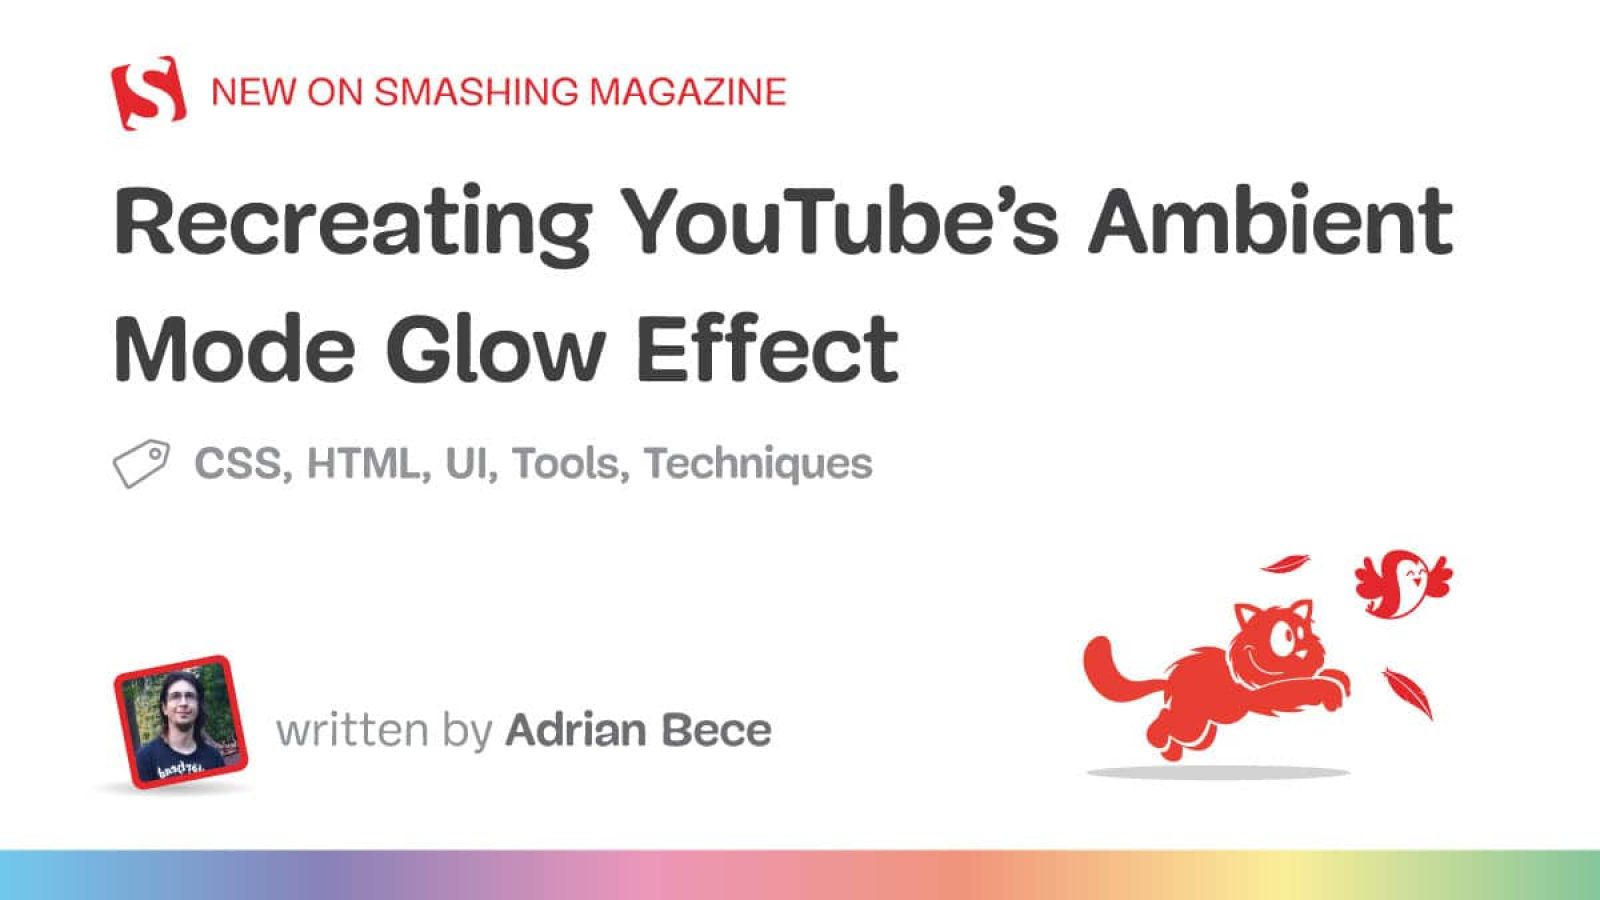 Recreating YouTube’s Ambient Mode Glow Impact